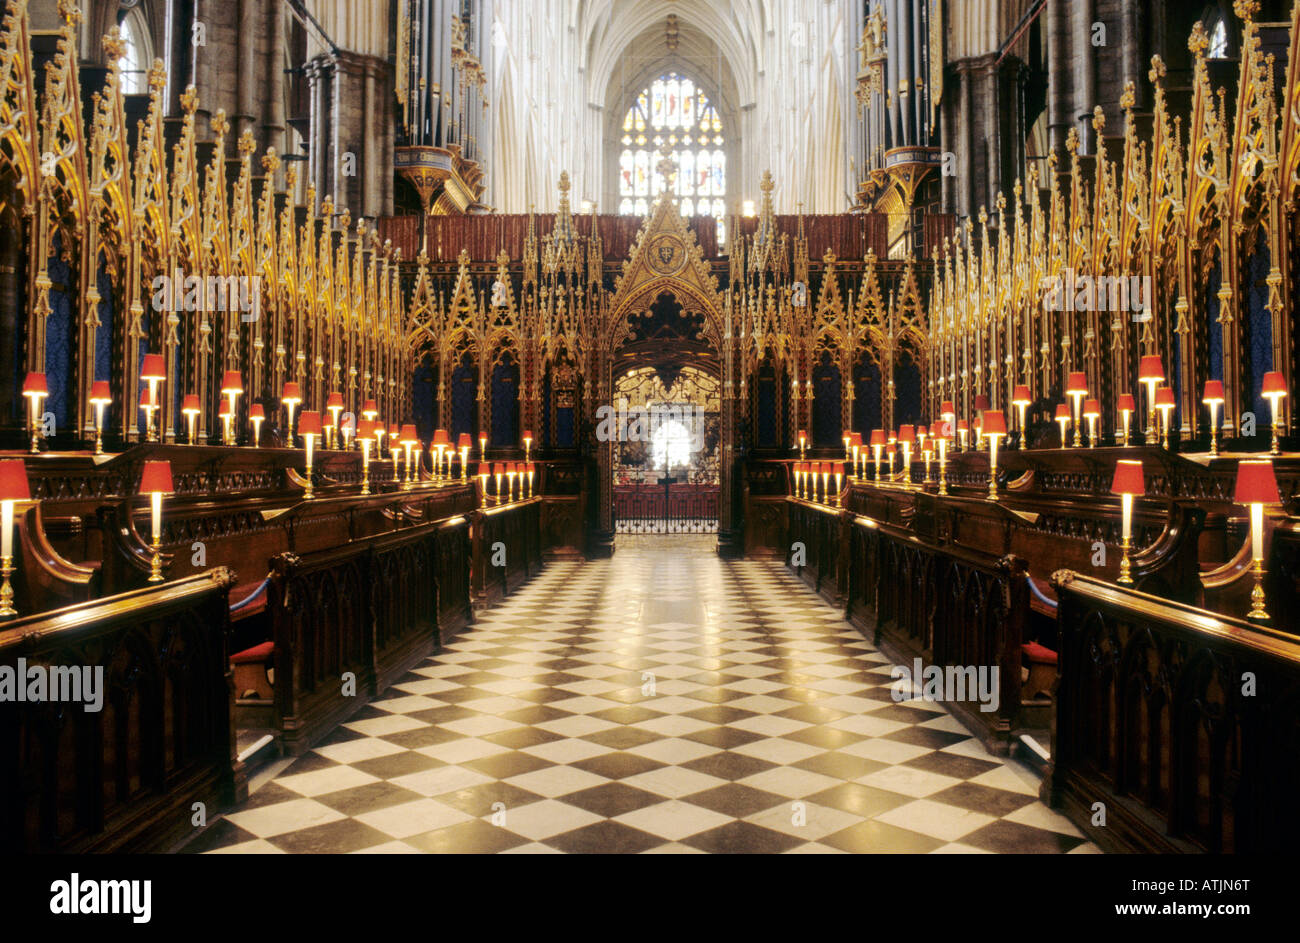 Westminster Abbey interior Choir stalls candle light gothic architecture London England UK nave Medieval architecture English Stock Photo